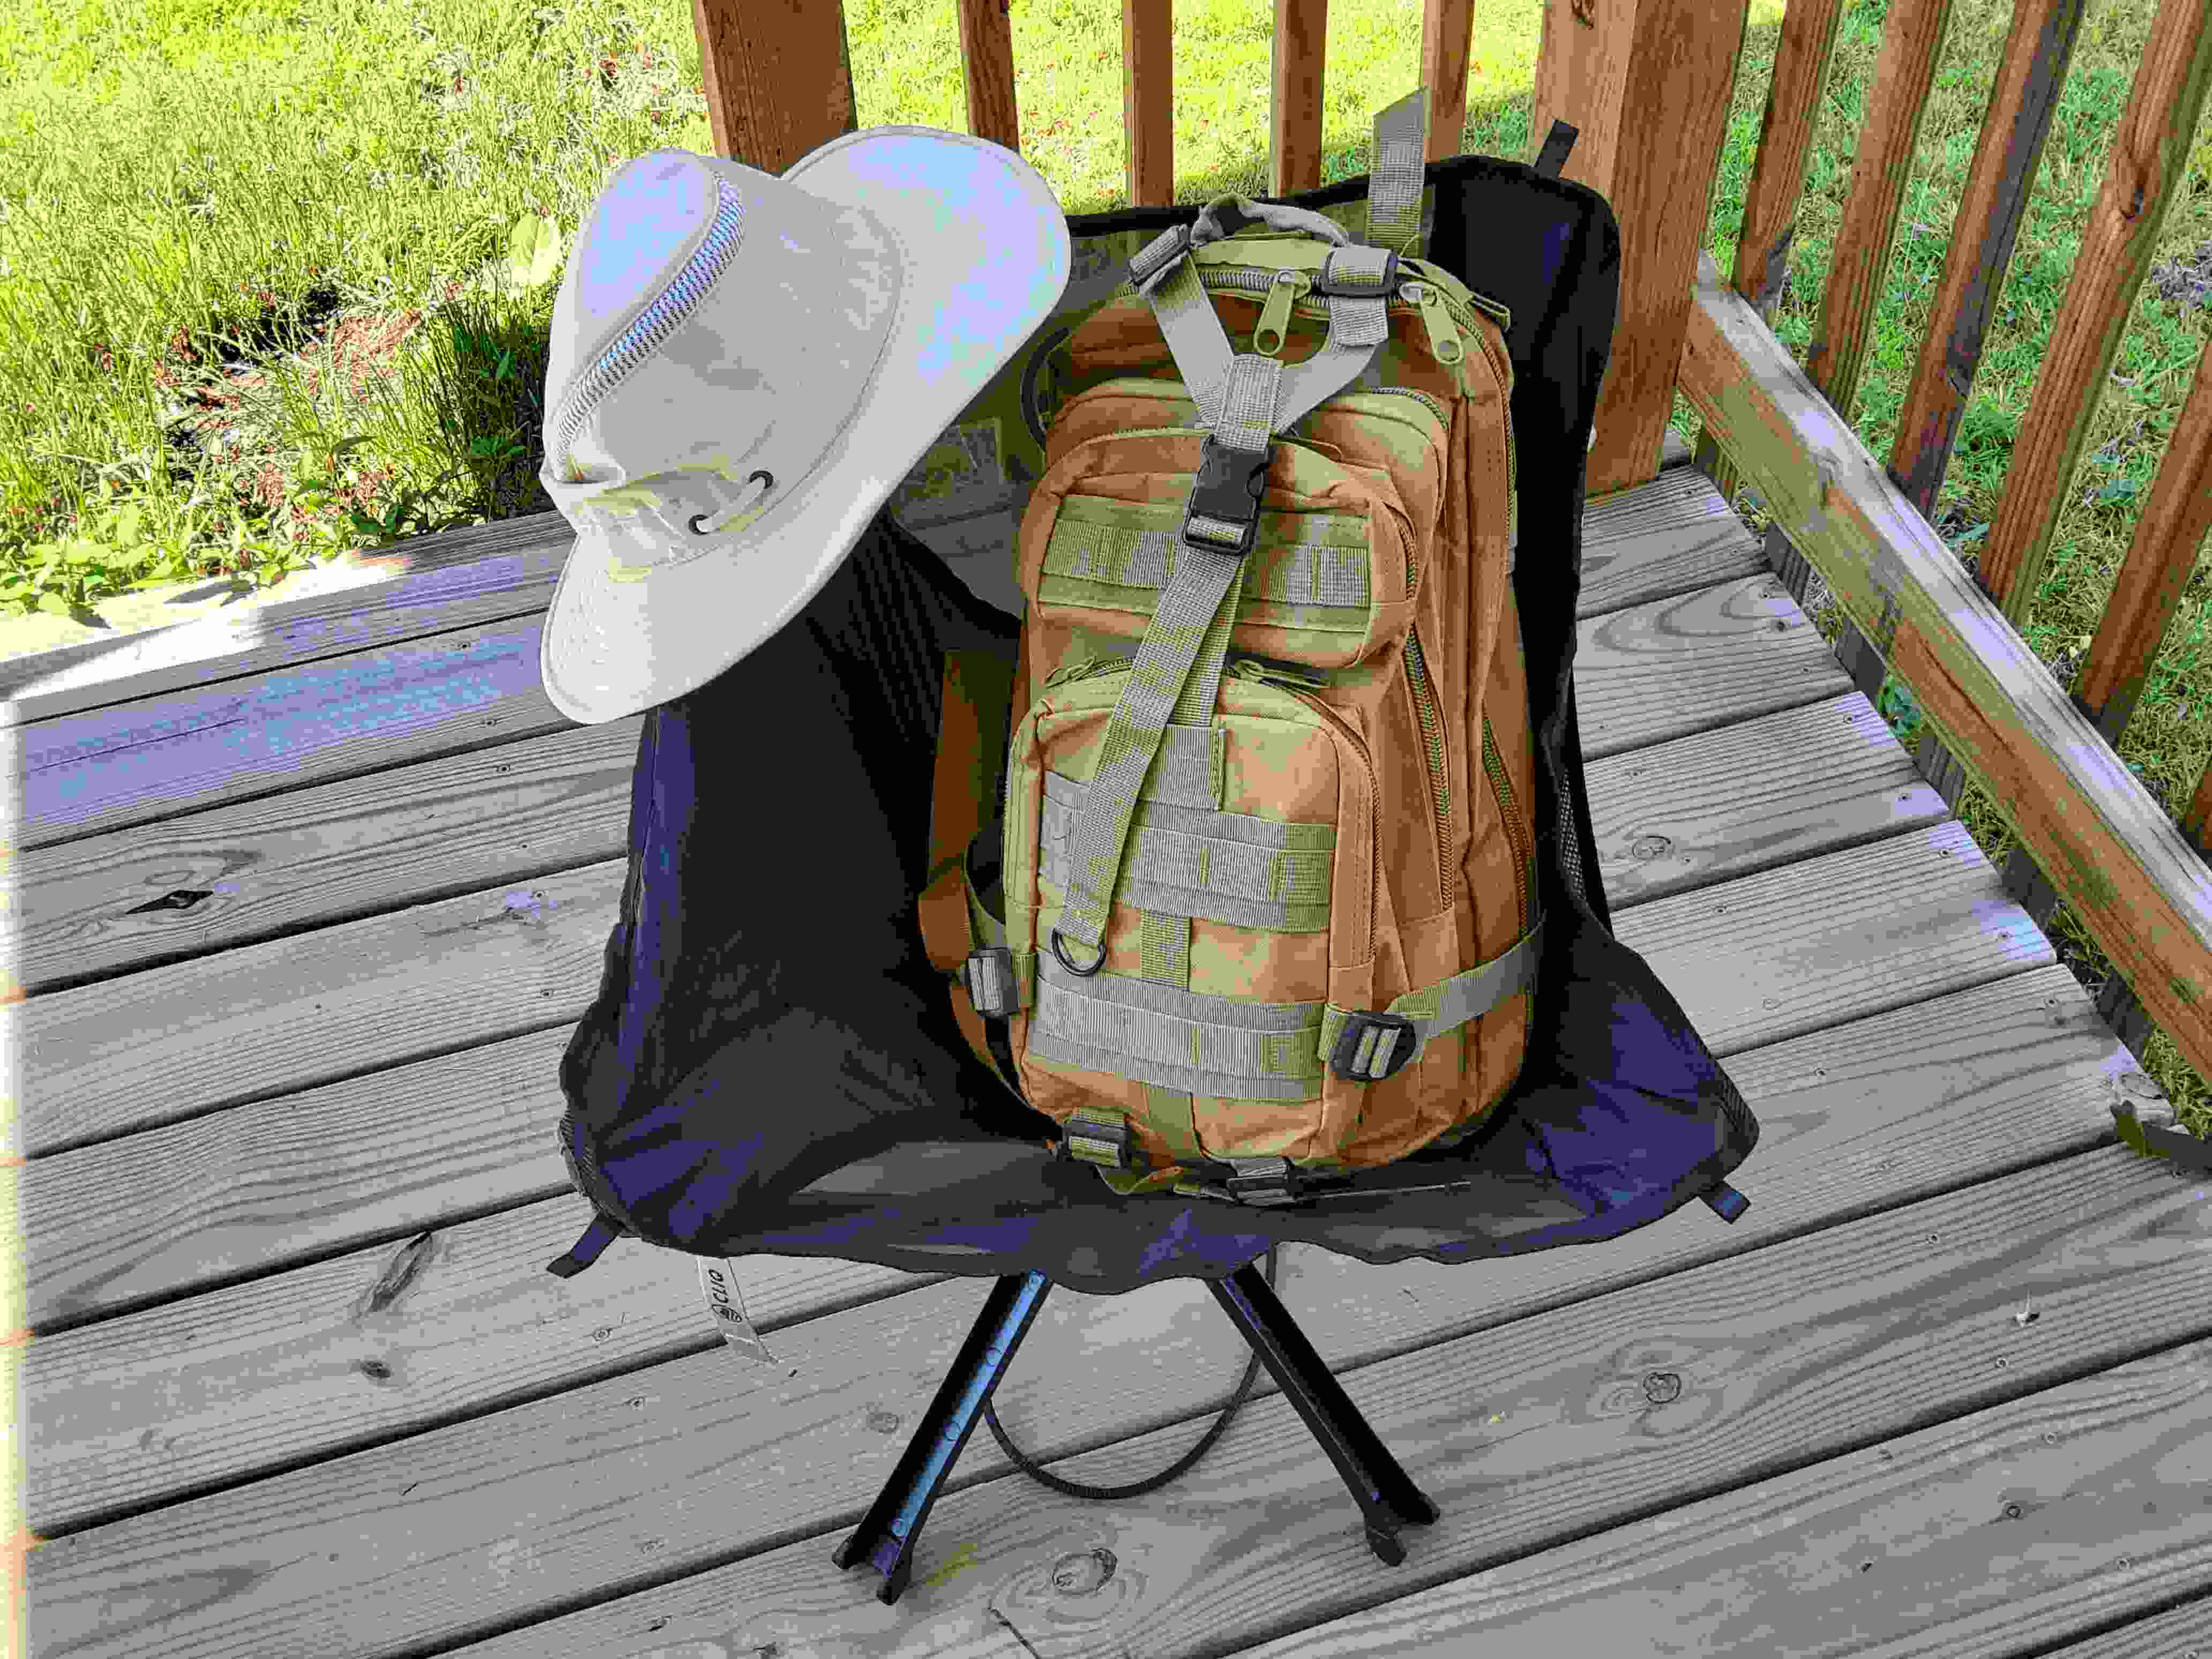 TR-35 ready to go in generic tactical daypack, with folding chair and hat.